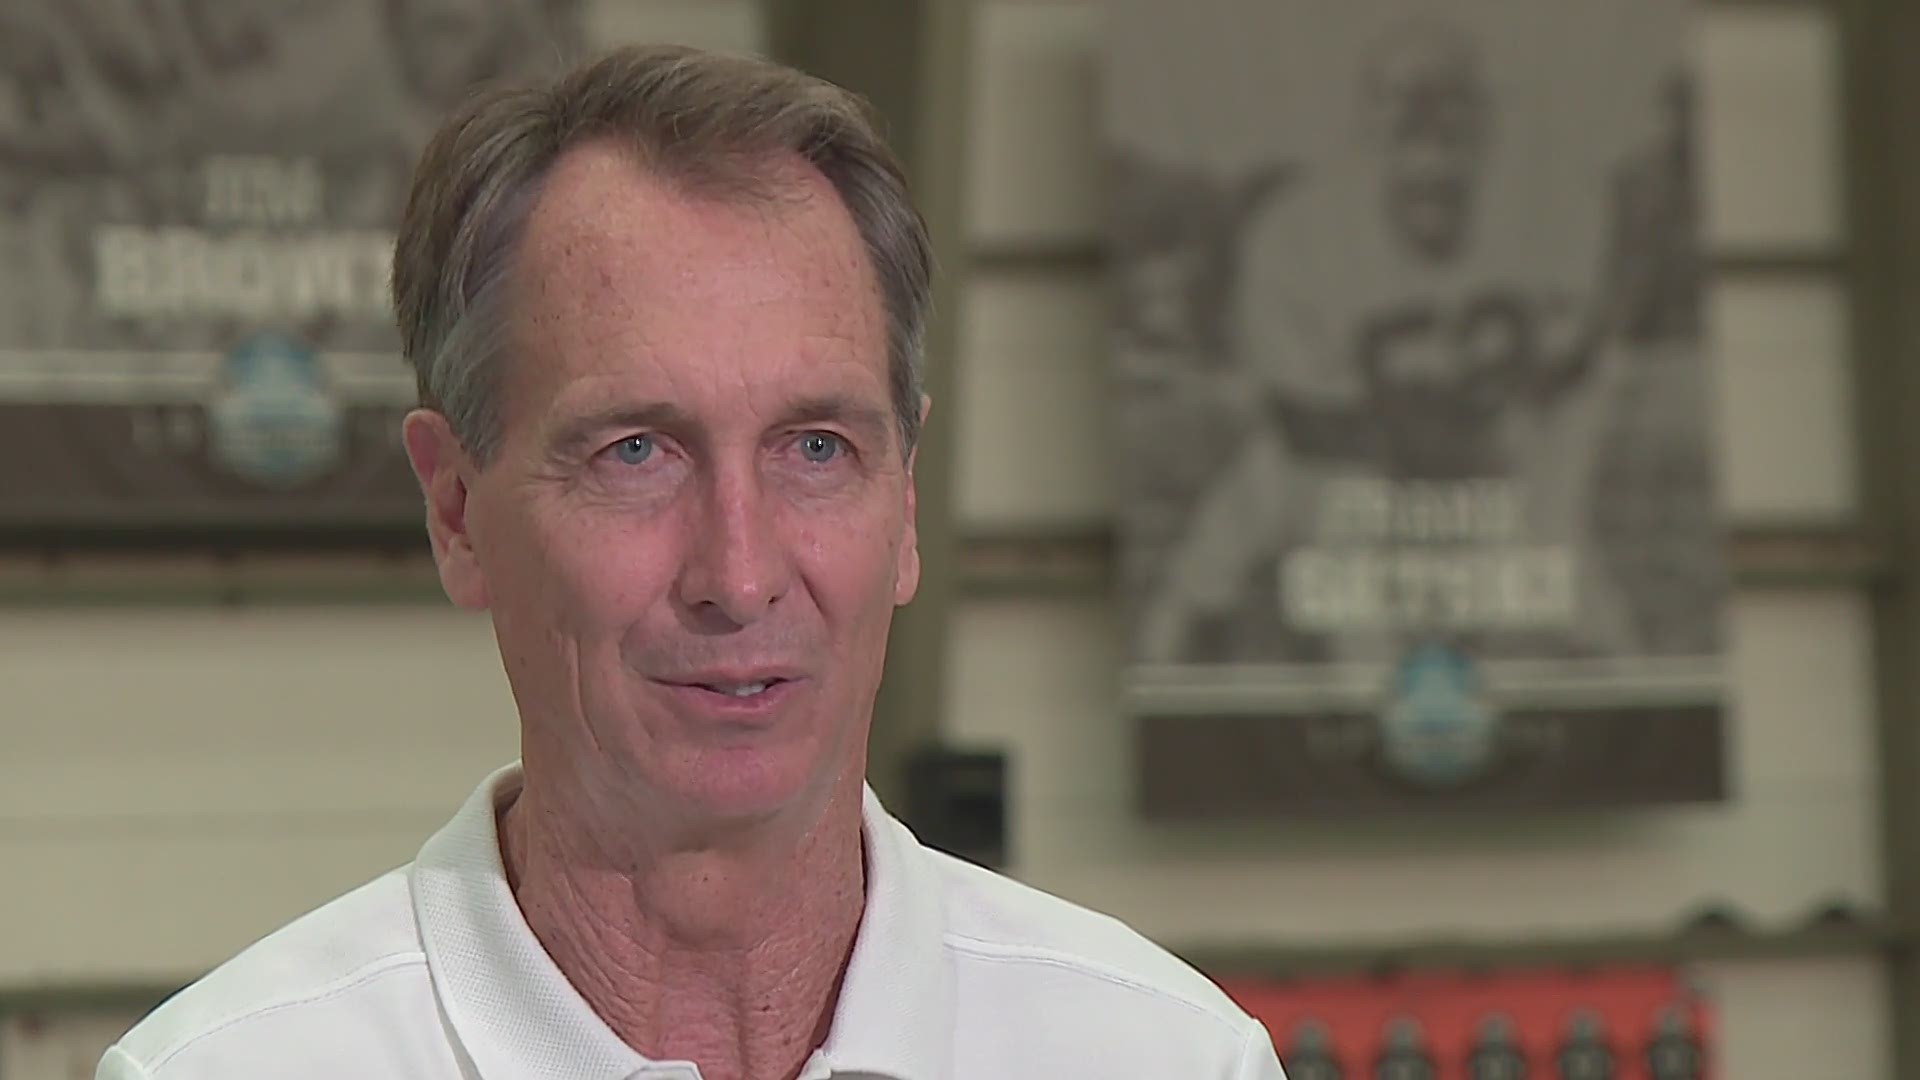 In an exclusive interview with Channel 3, "Sunday Night Football" analyst Cris Collinsworth expressed optimism about Browns' future.